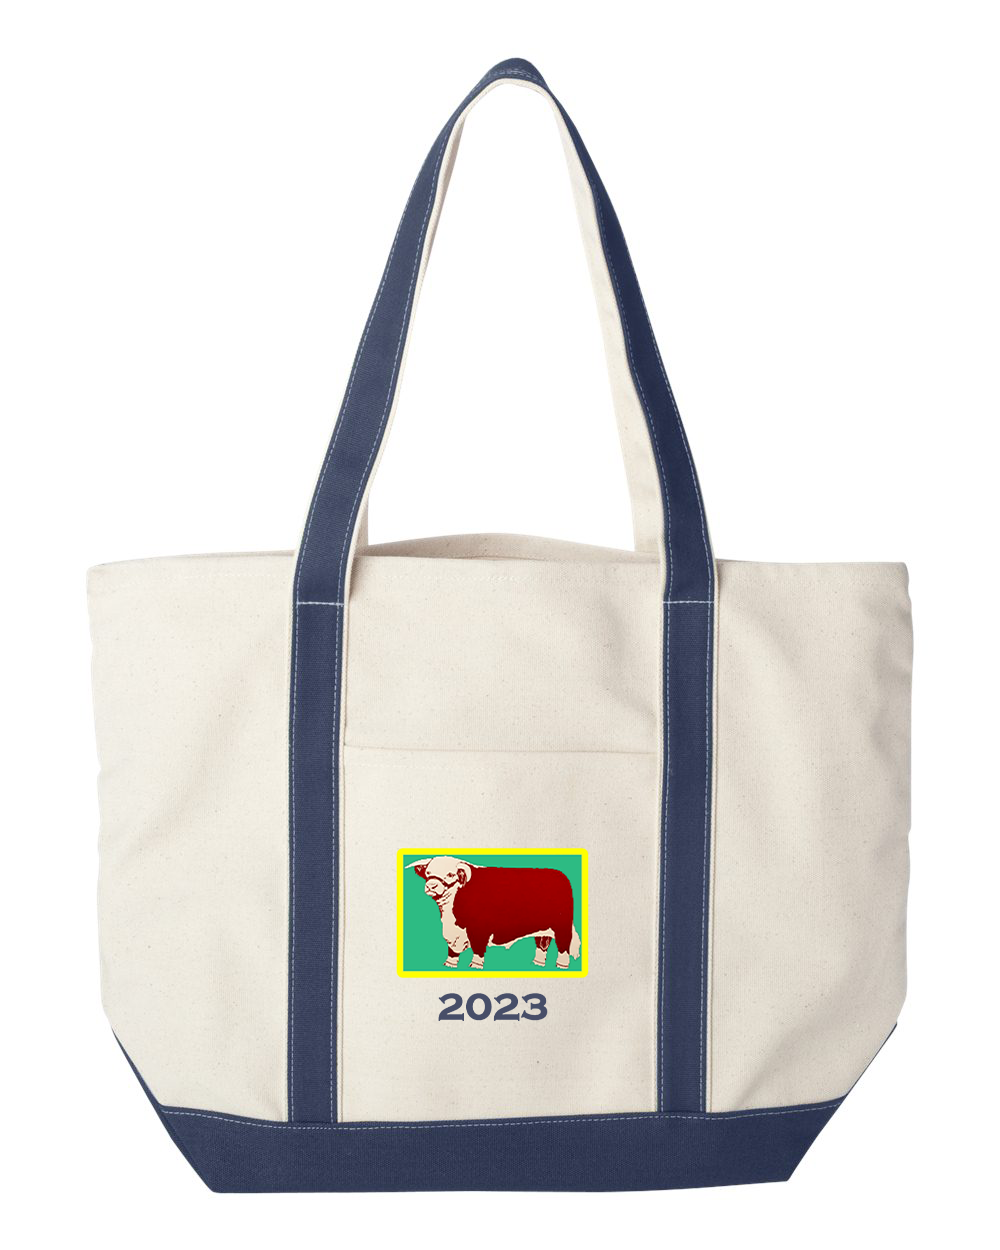 custom design of Liberty Bags 8872-16 Ounce Cotton Canvas Tote